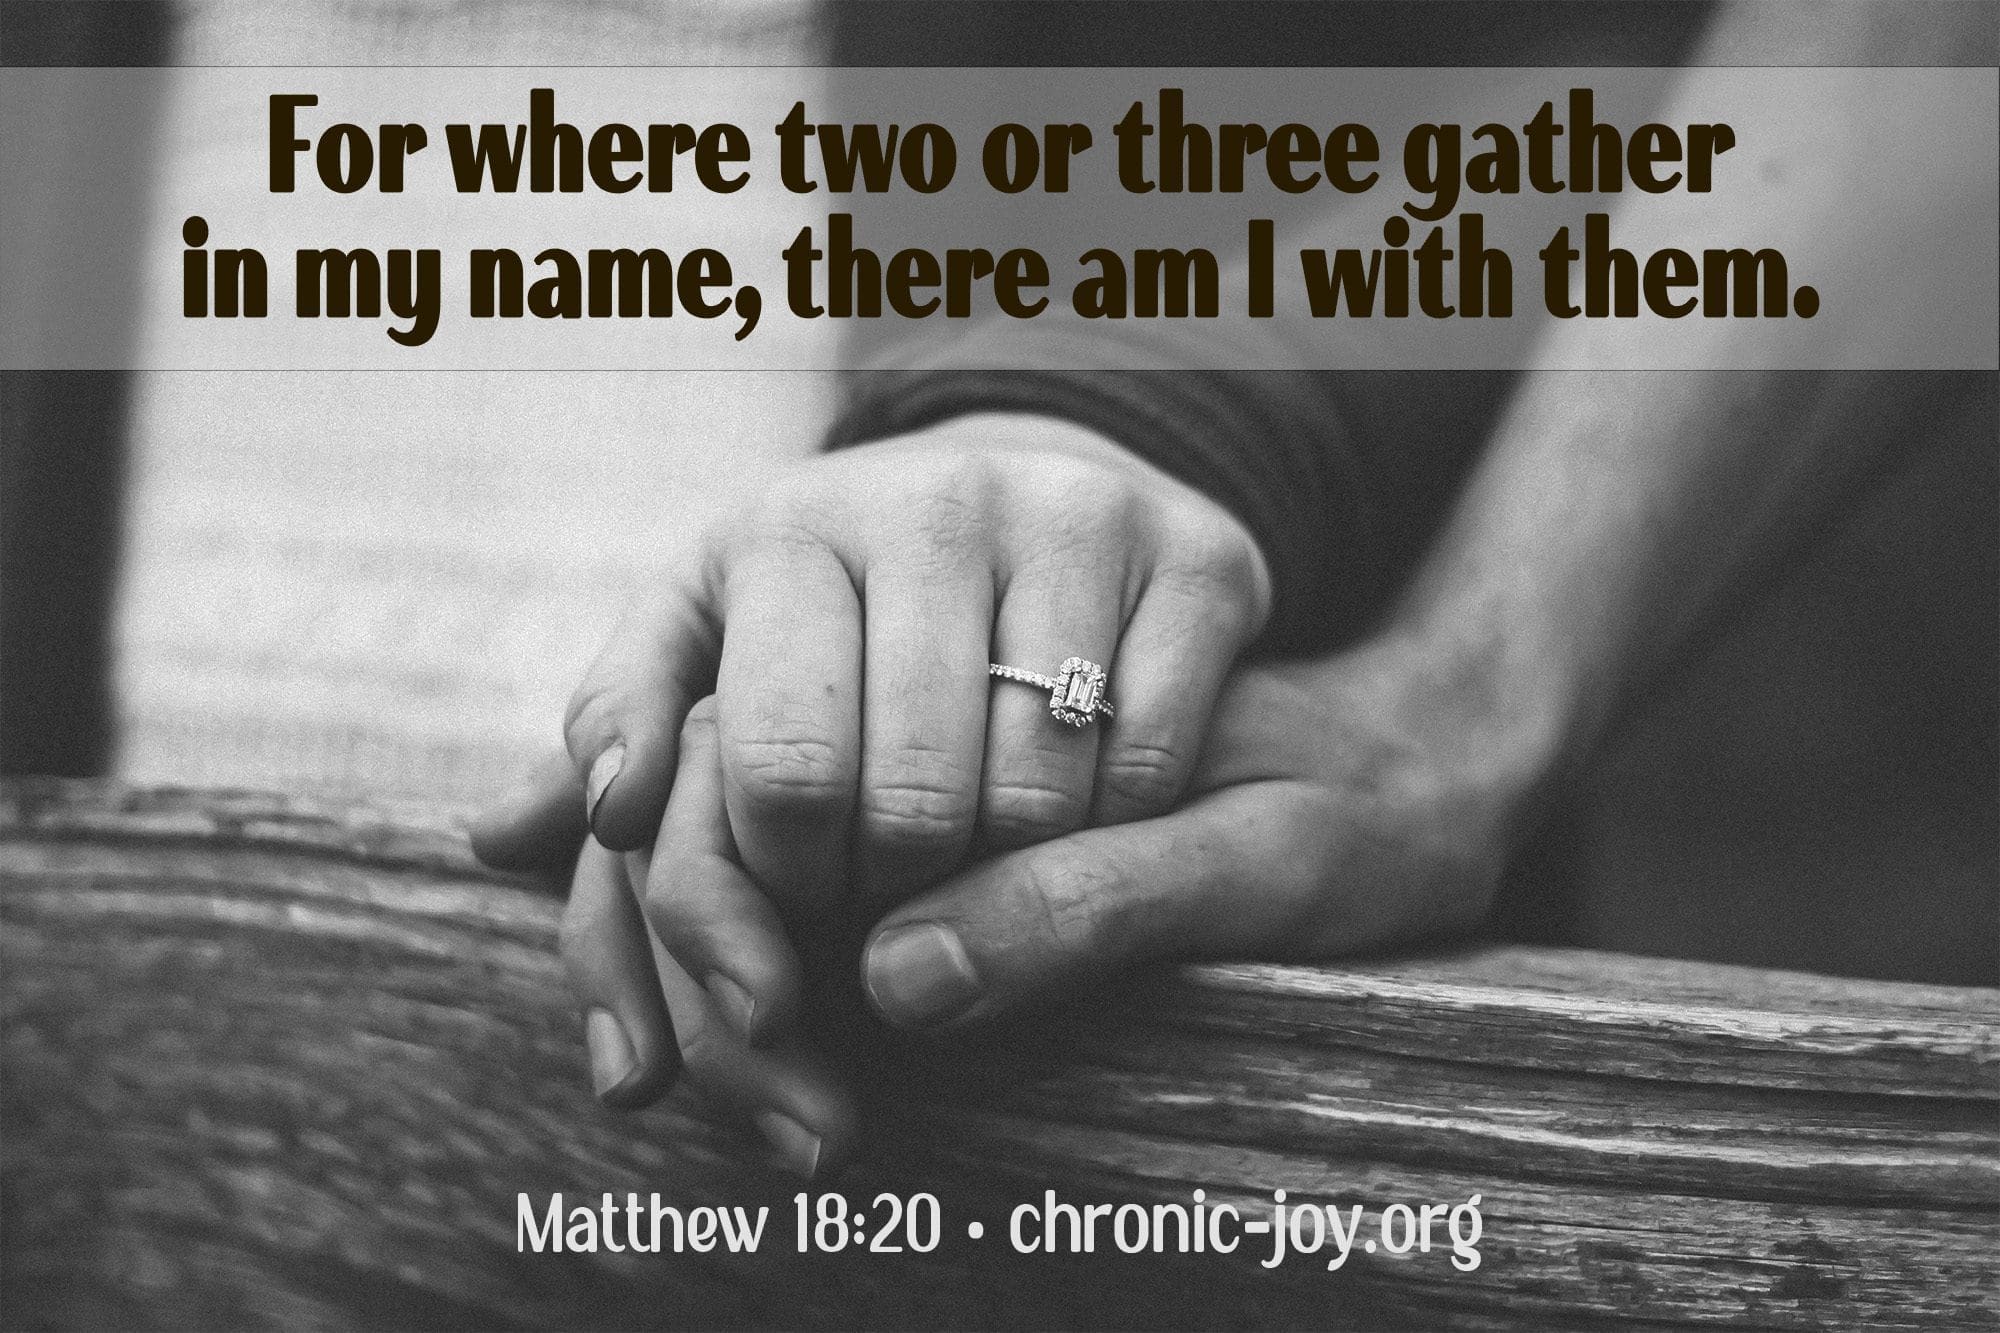 "For where two or three gather in my name, there am I with them." Matthew 18:20